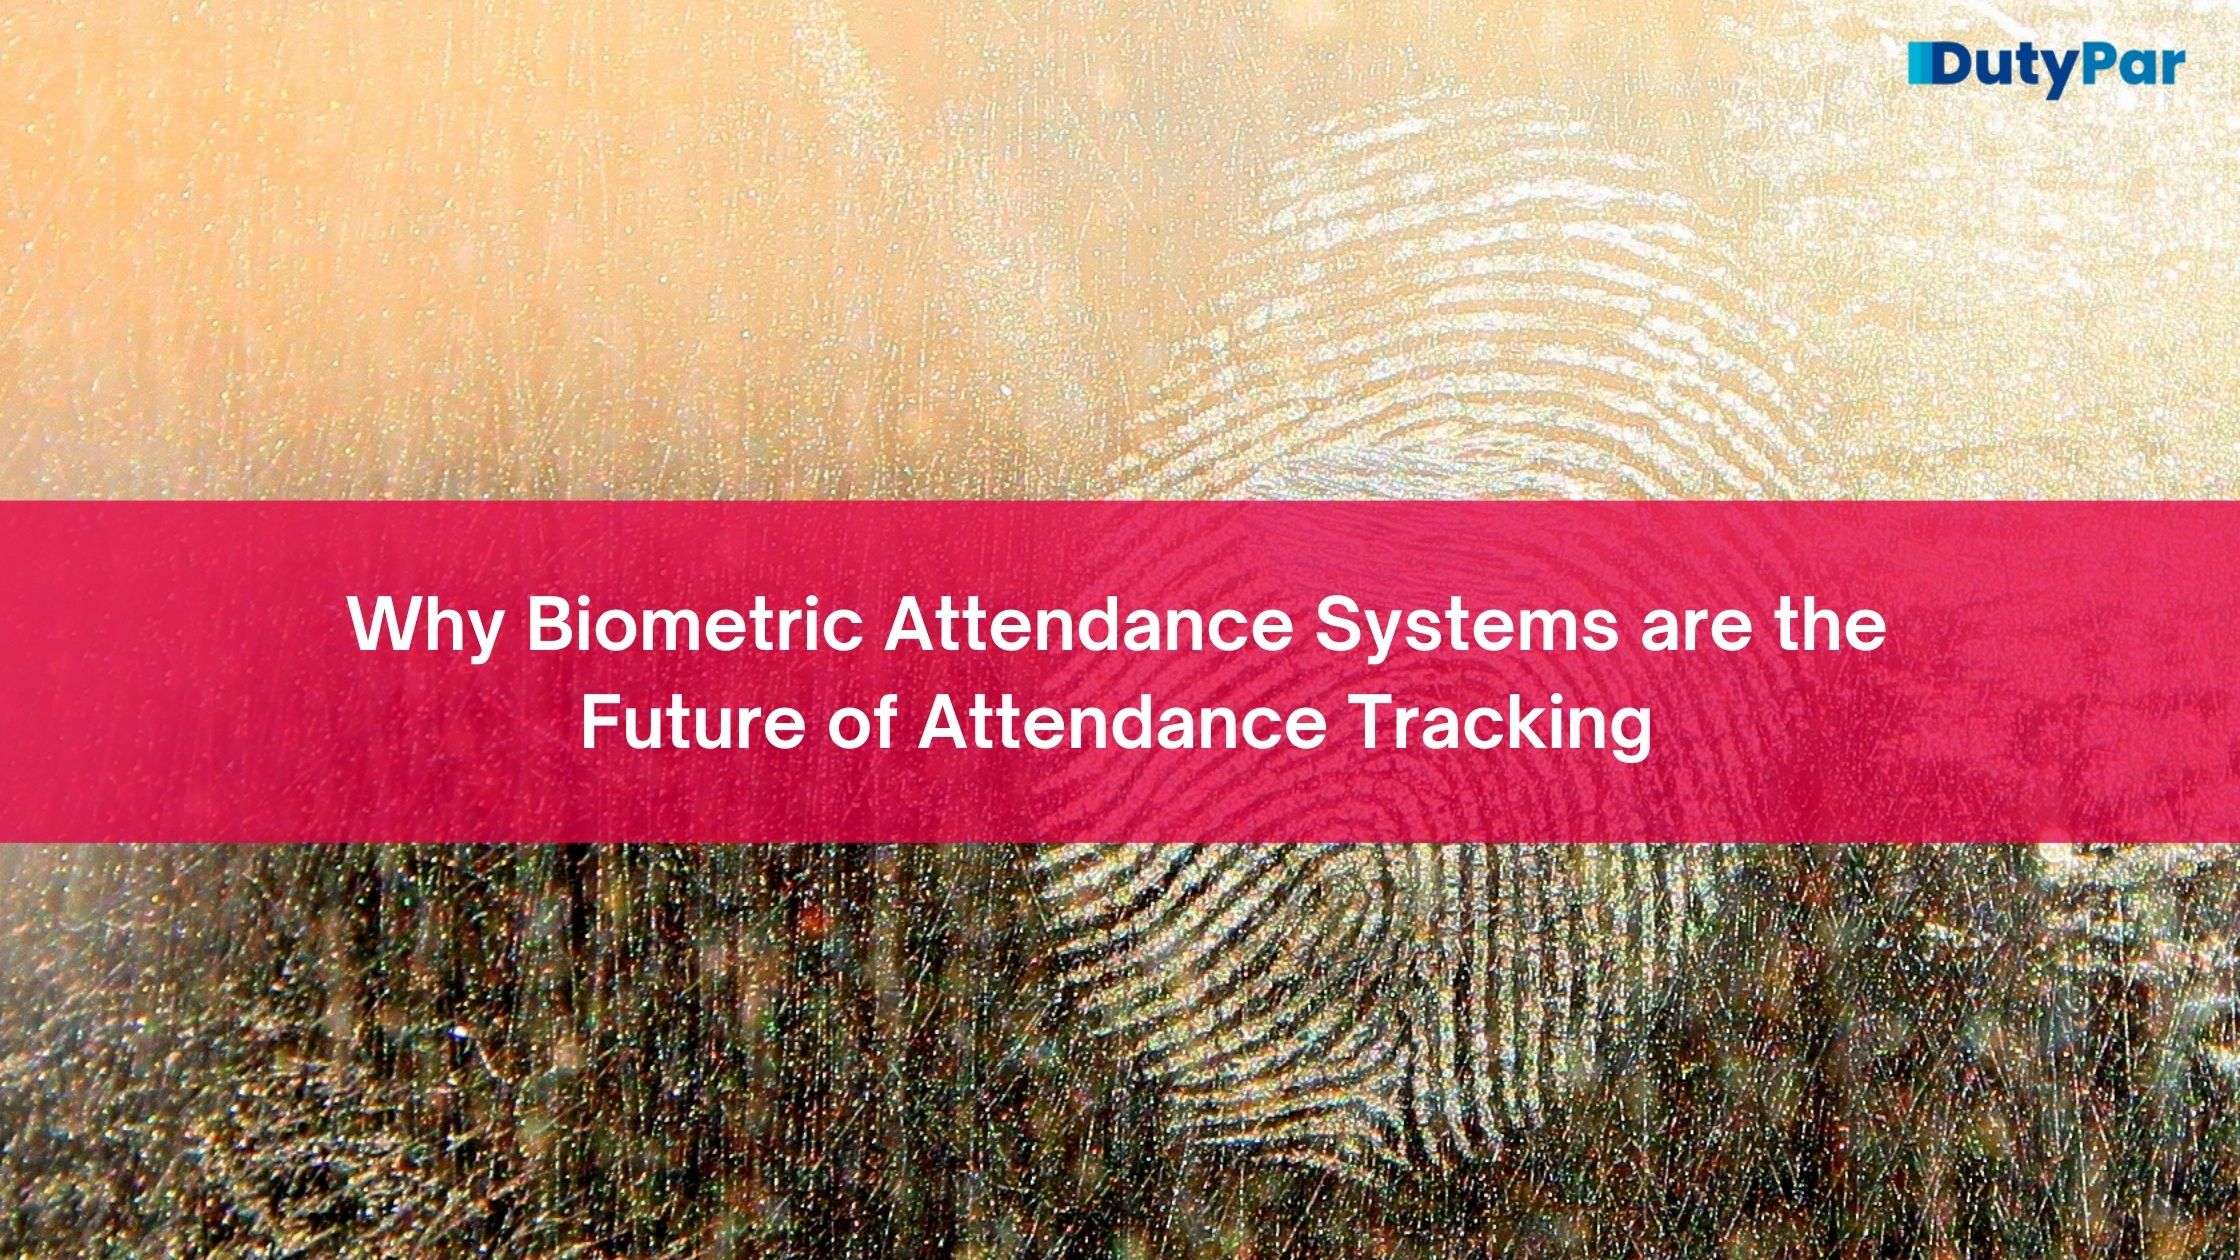 Why Biometric Attendance Systems are the Future of Attendance Tracking